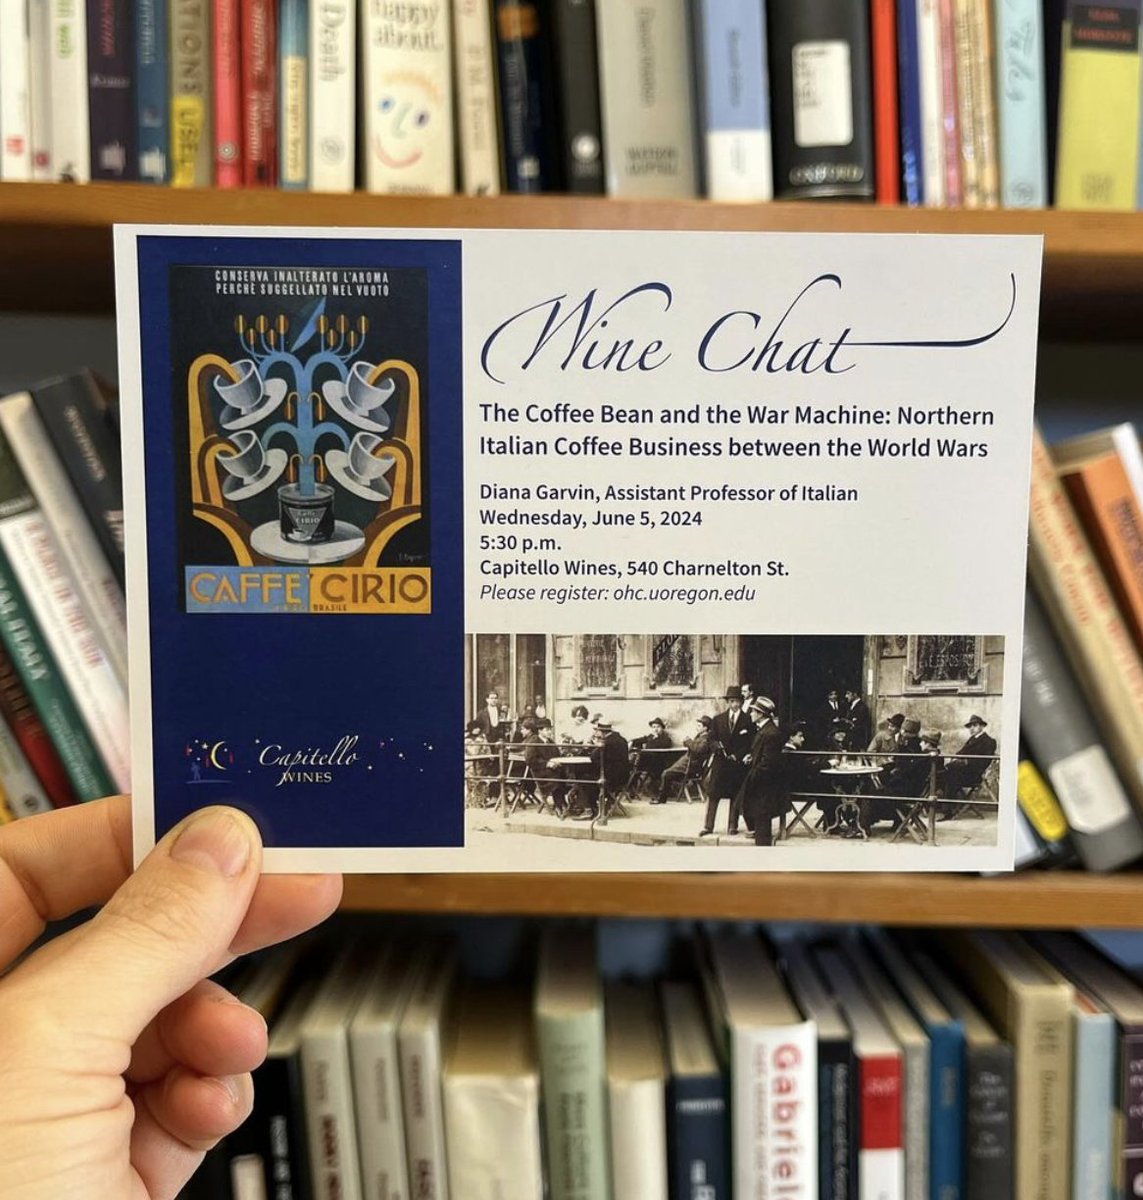 On Wednesday, June 5th @CapitelloWines I'm giving a talk on the interwar history of Italian coffee. If you're in #Eugene, would love to see you there! #italianhistory #foodhistory #coffeehistory @uoregon @UO_Research @uo_humanities @uolibraries @uoromance